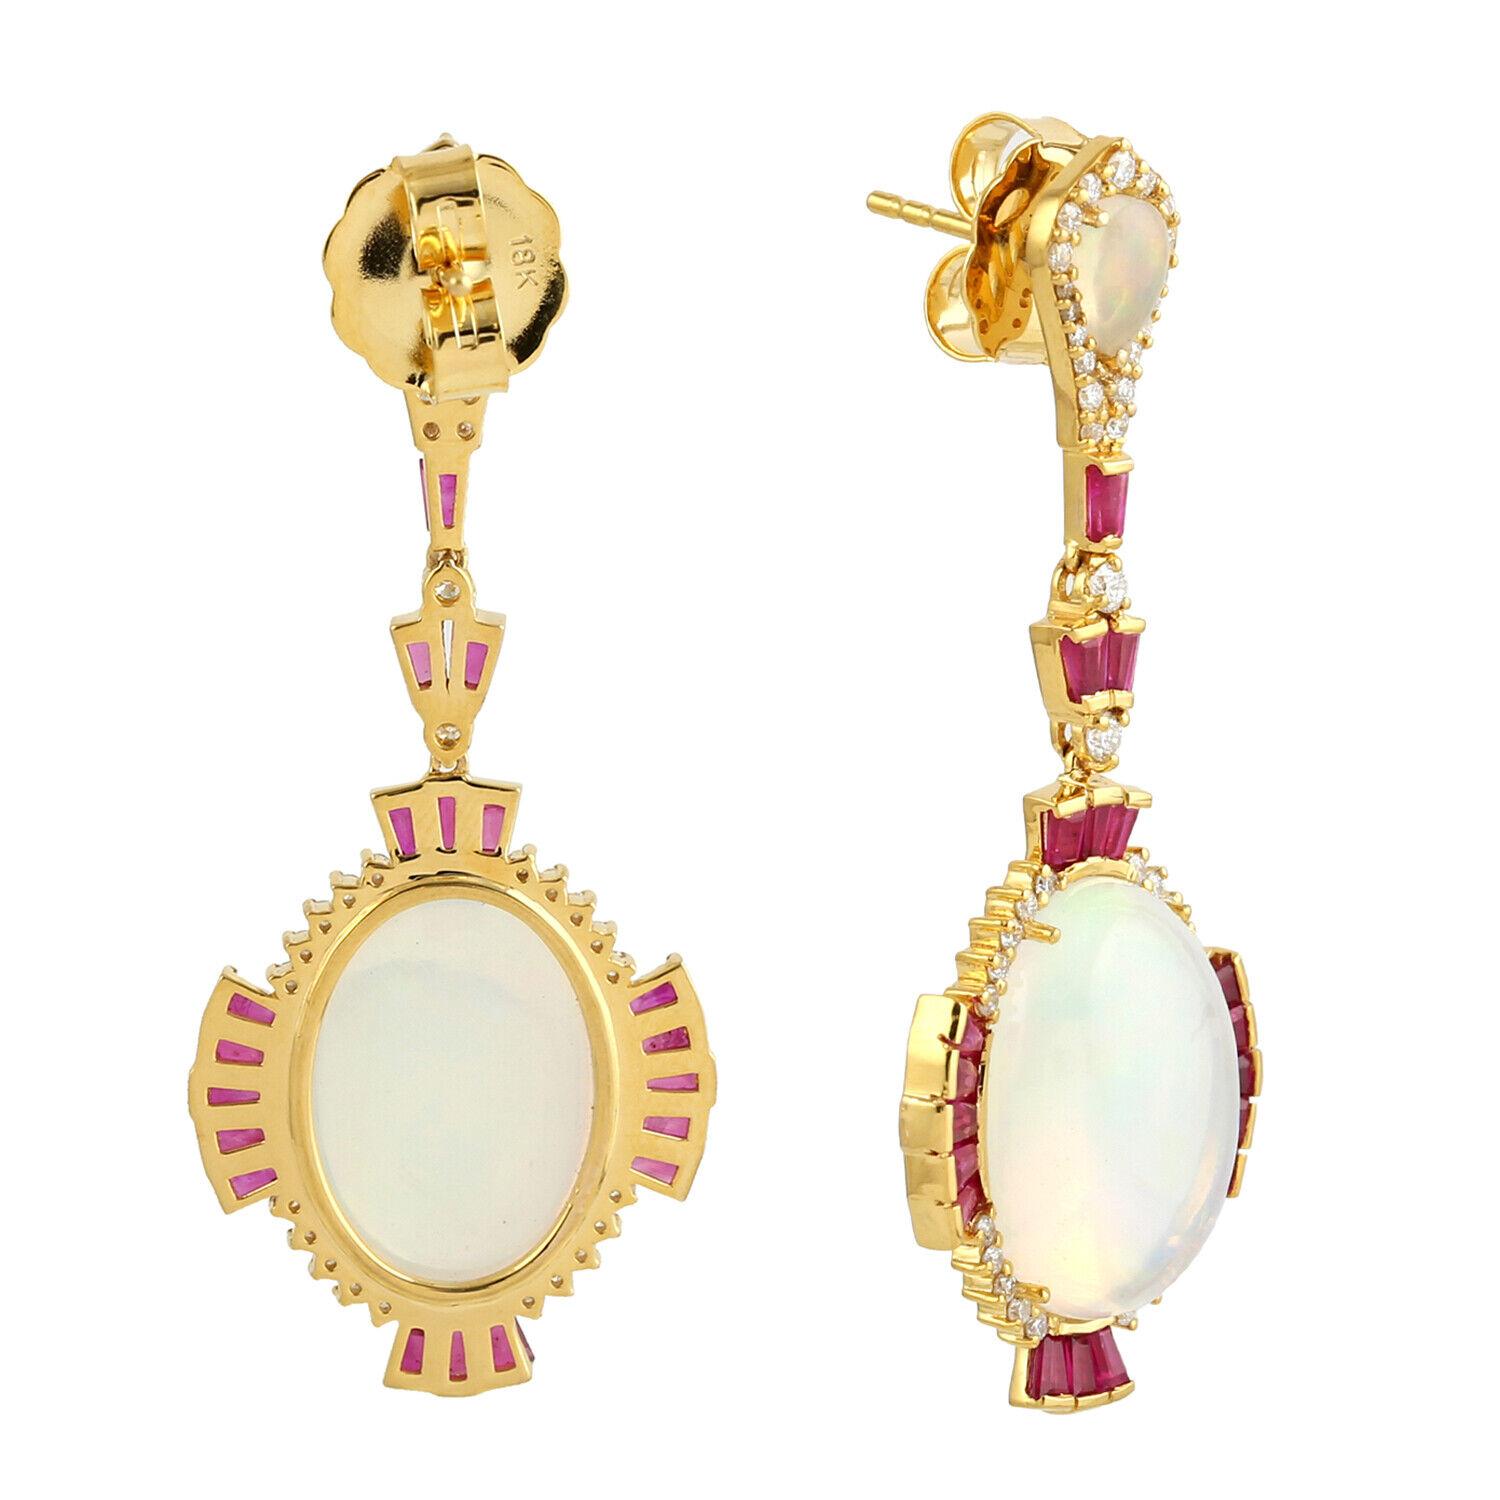 Cast in 14 karat gold. These earrings are hand set in 14.0 carats Ethiopian opal and ruby, .57 carats of sparkling diamonds. 

FOLLOW MEGHNA JEWELS storefront to view the latest collection & exclusive pieces. Meghna Jewels is proudly rated as a Top